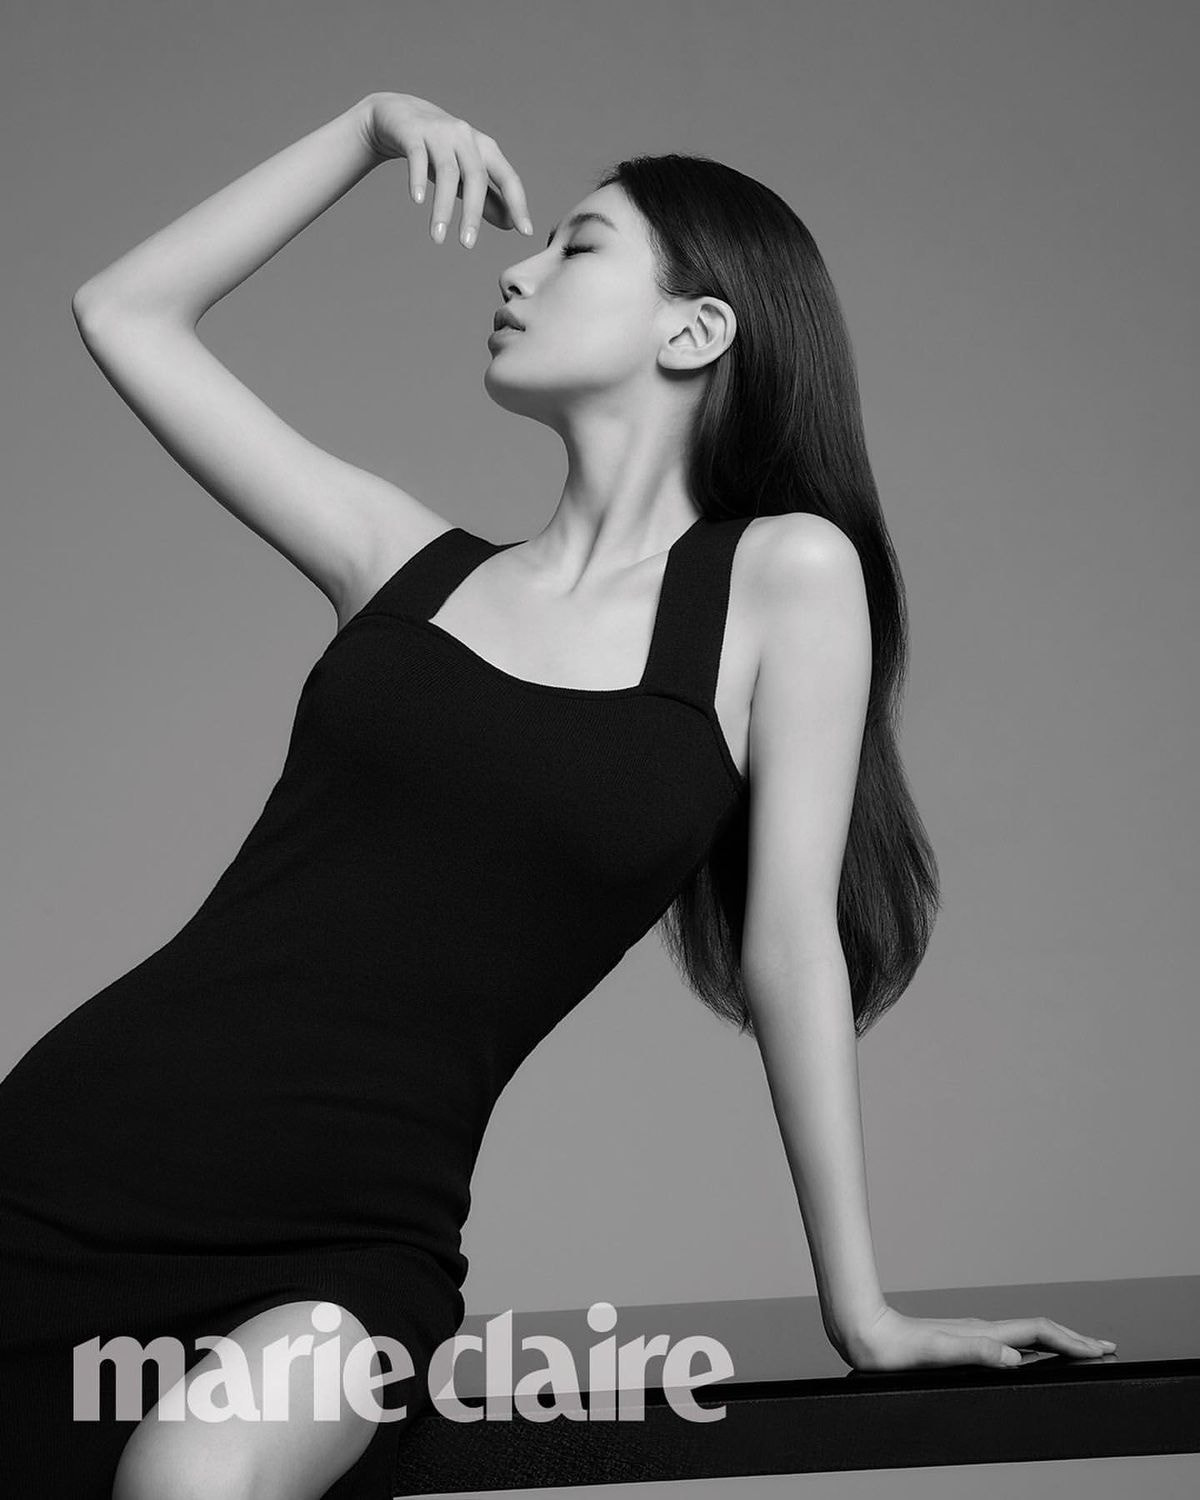 suzy-looking-extra-stunning-in-new-pictorial-for-marie-claire-magazine